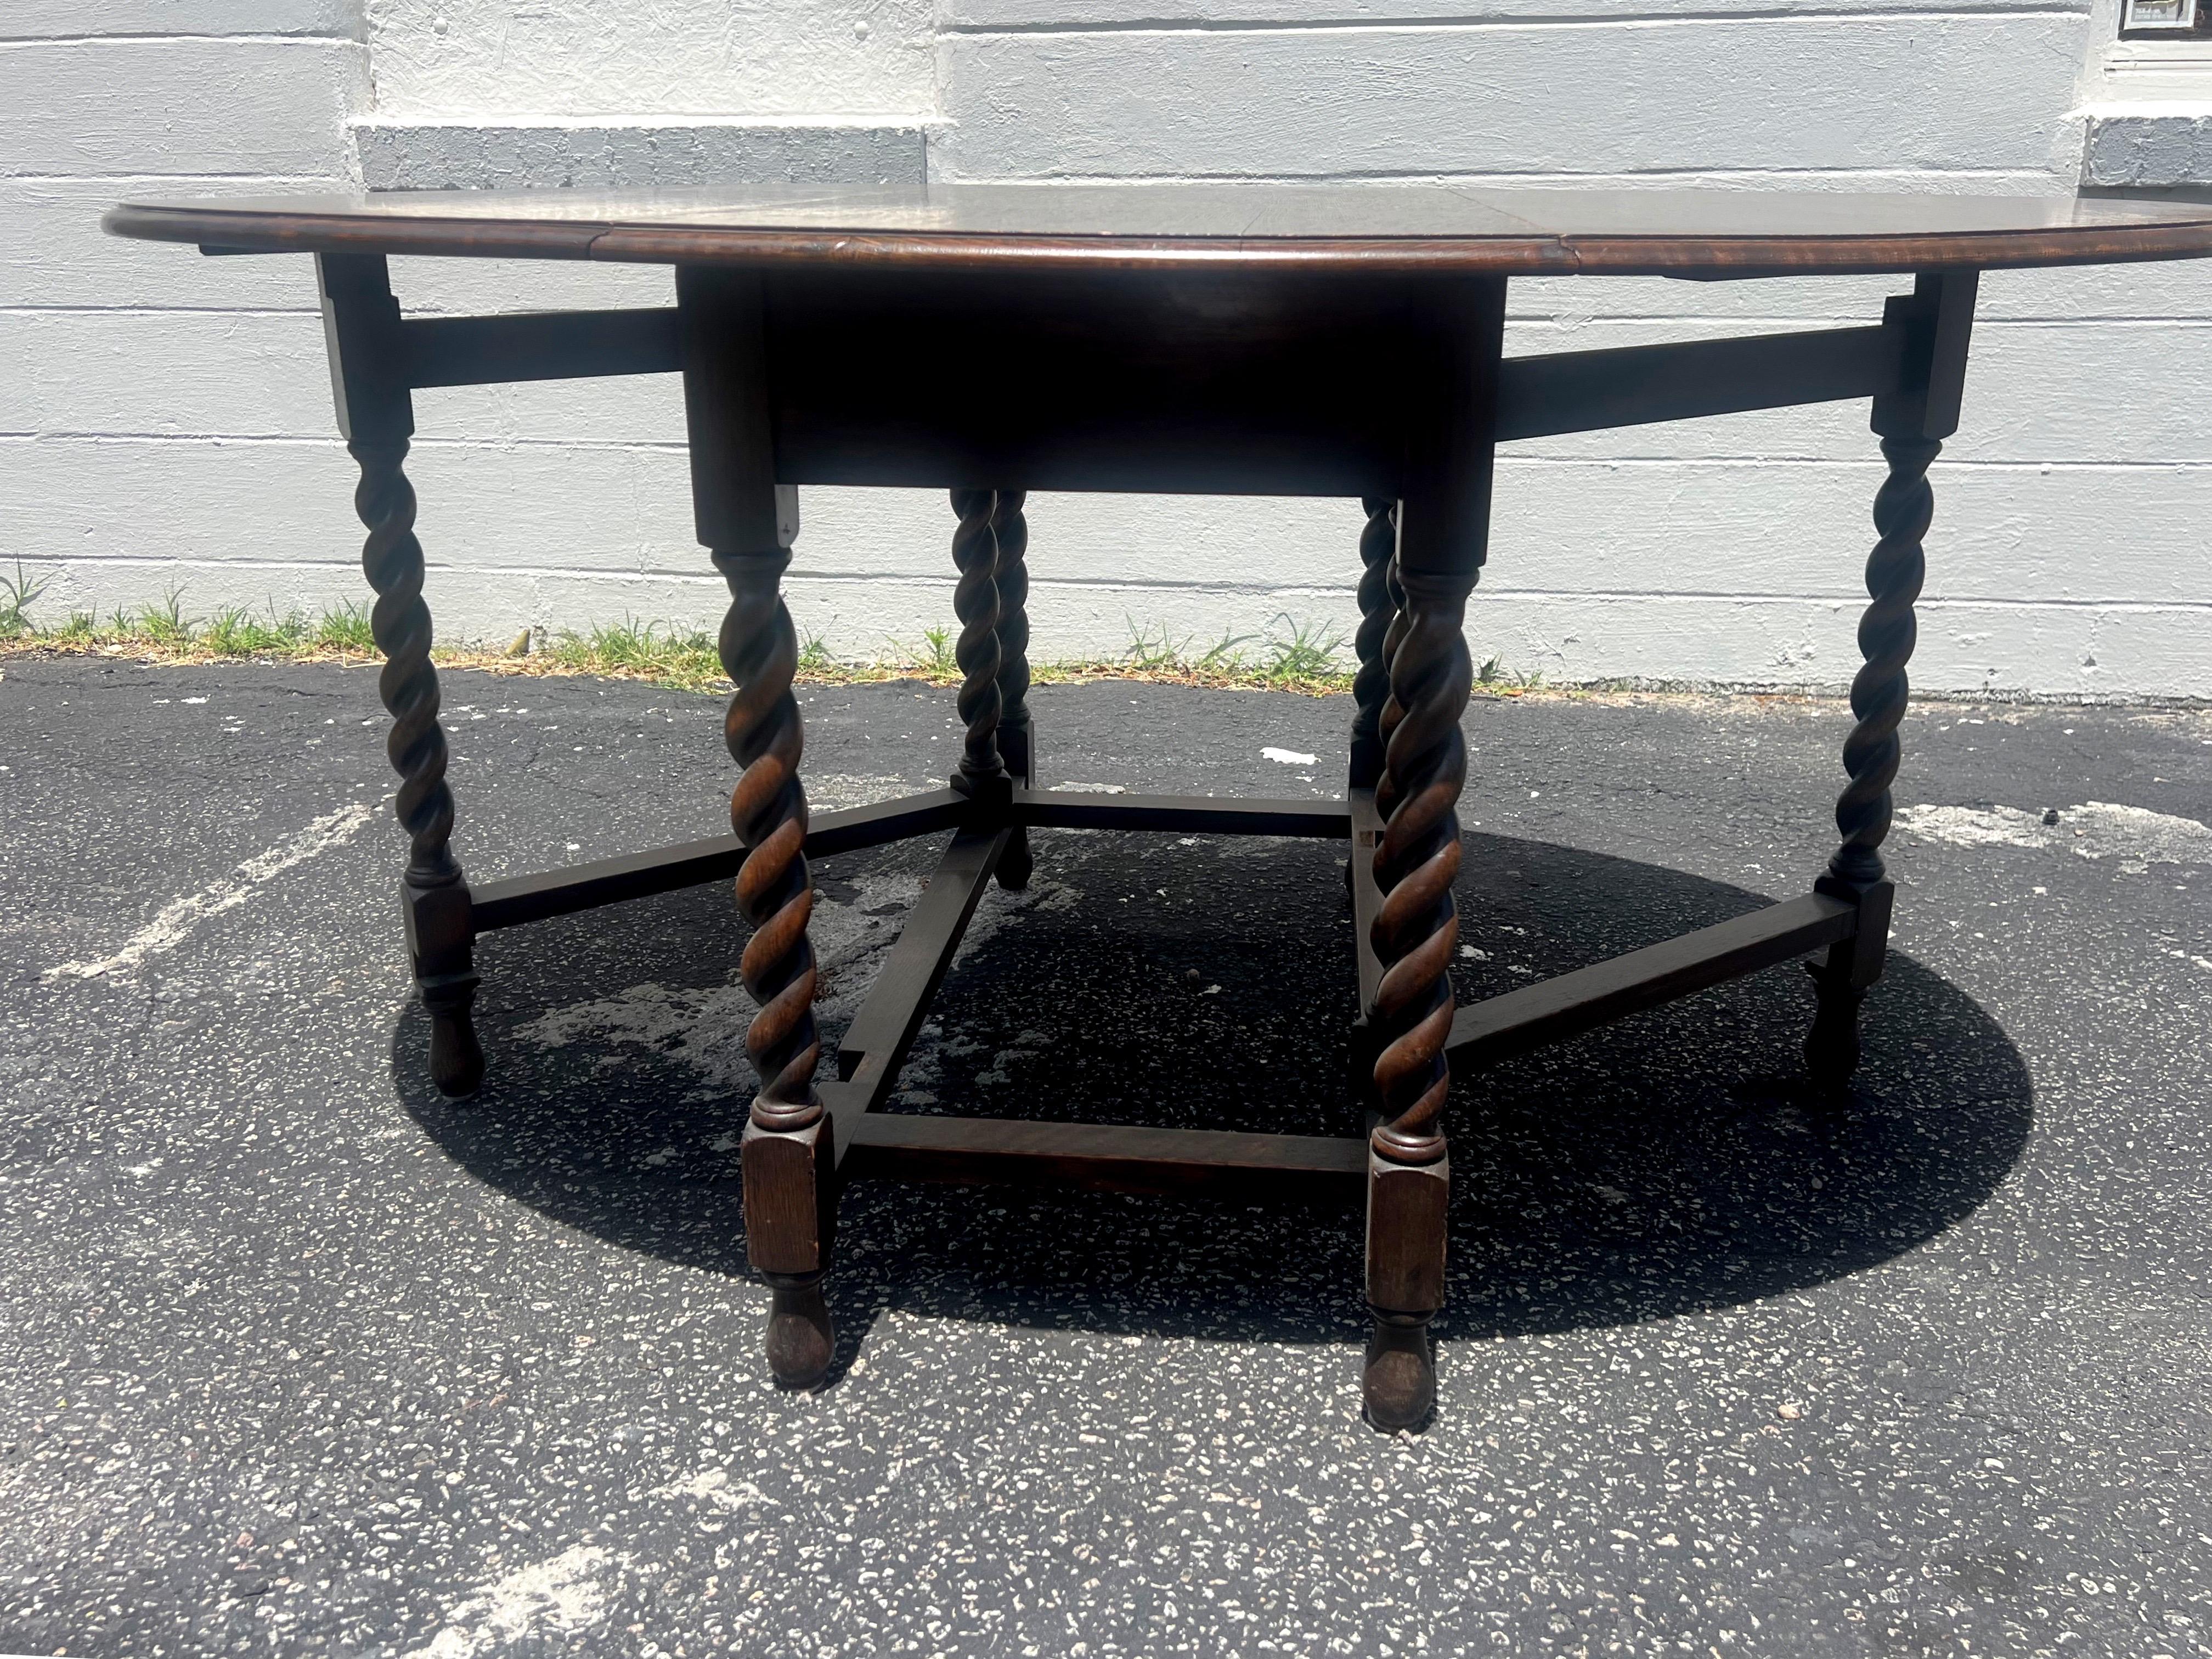 A fantastic and versatile stunning English barley twist gate leg table. From an entryway, to behind a sofa, to the dining room. This classic table is absolutely gorgeous and works in almost any home. 
19” closed
Leaf measures 20.25”.